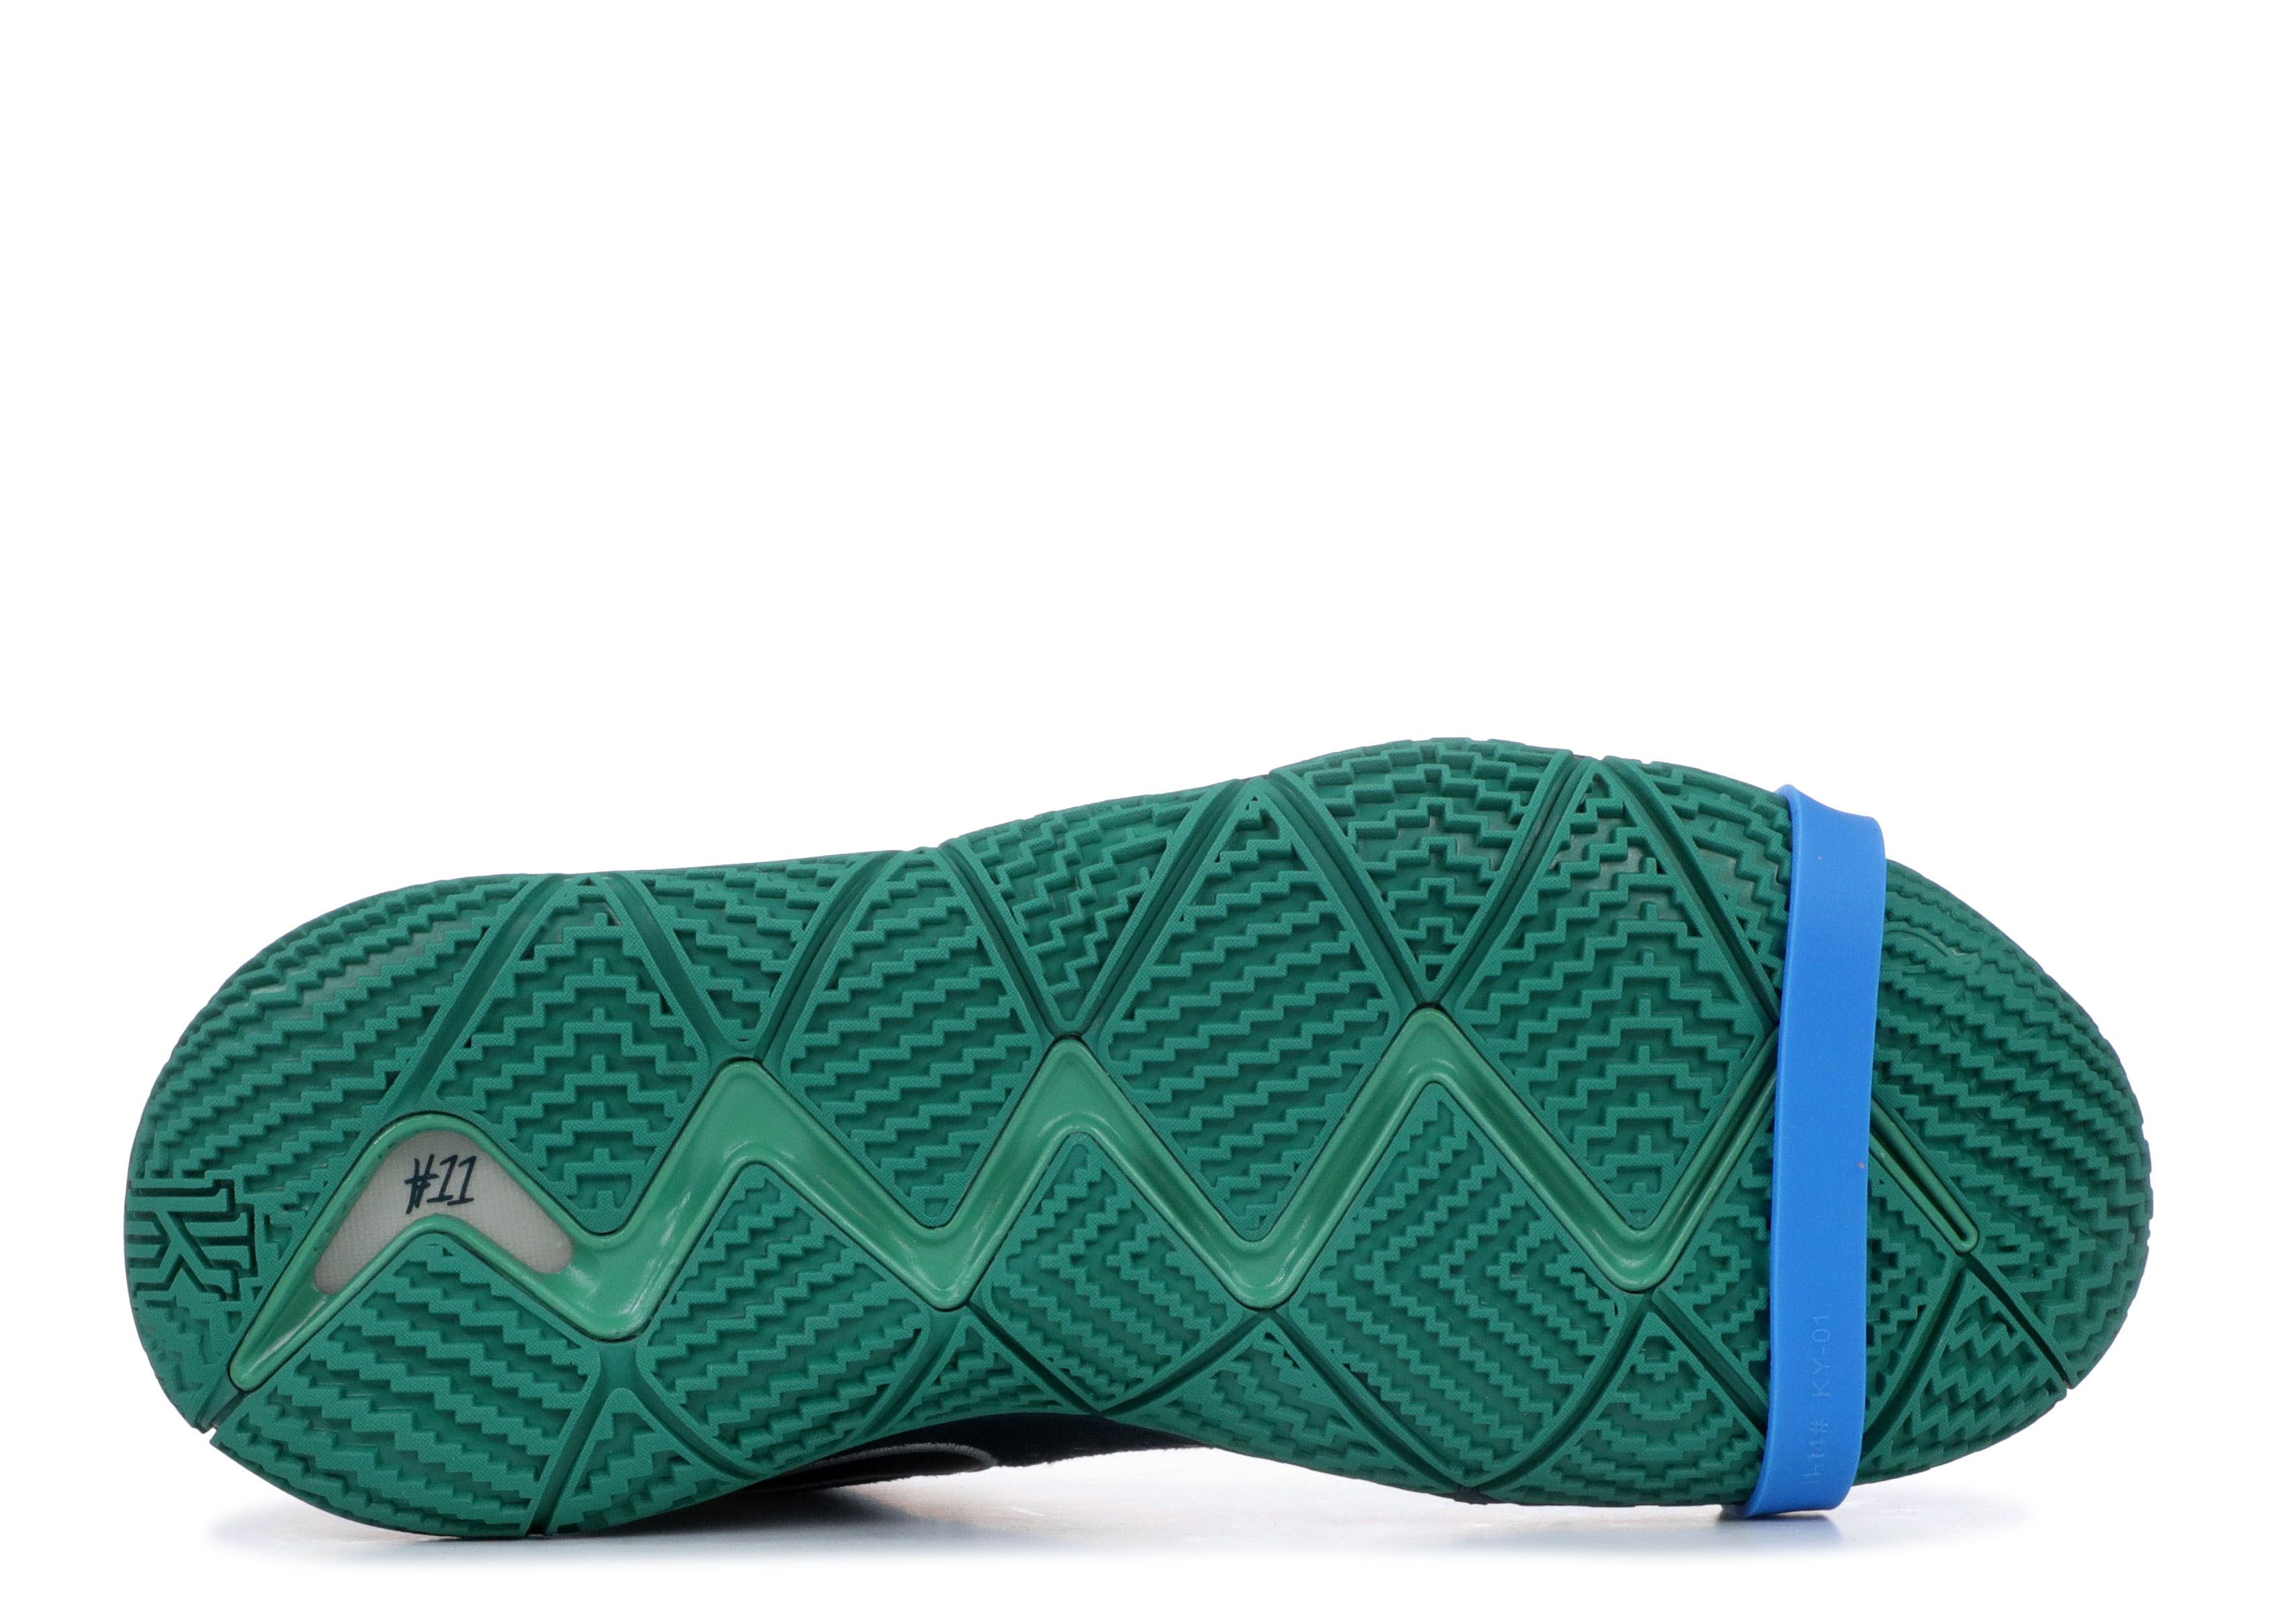 kyrie 4 green lobster for sale